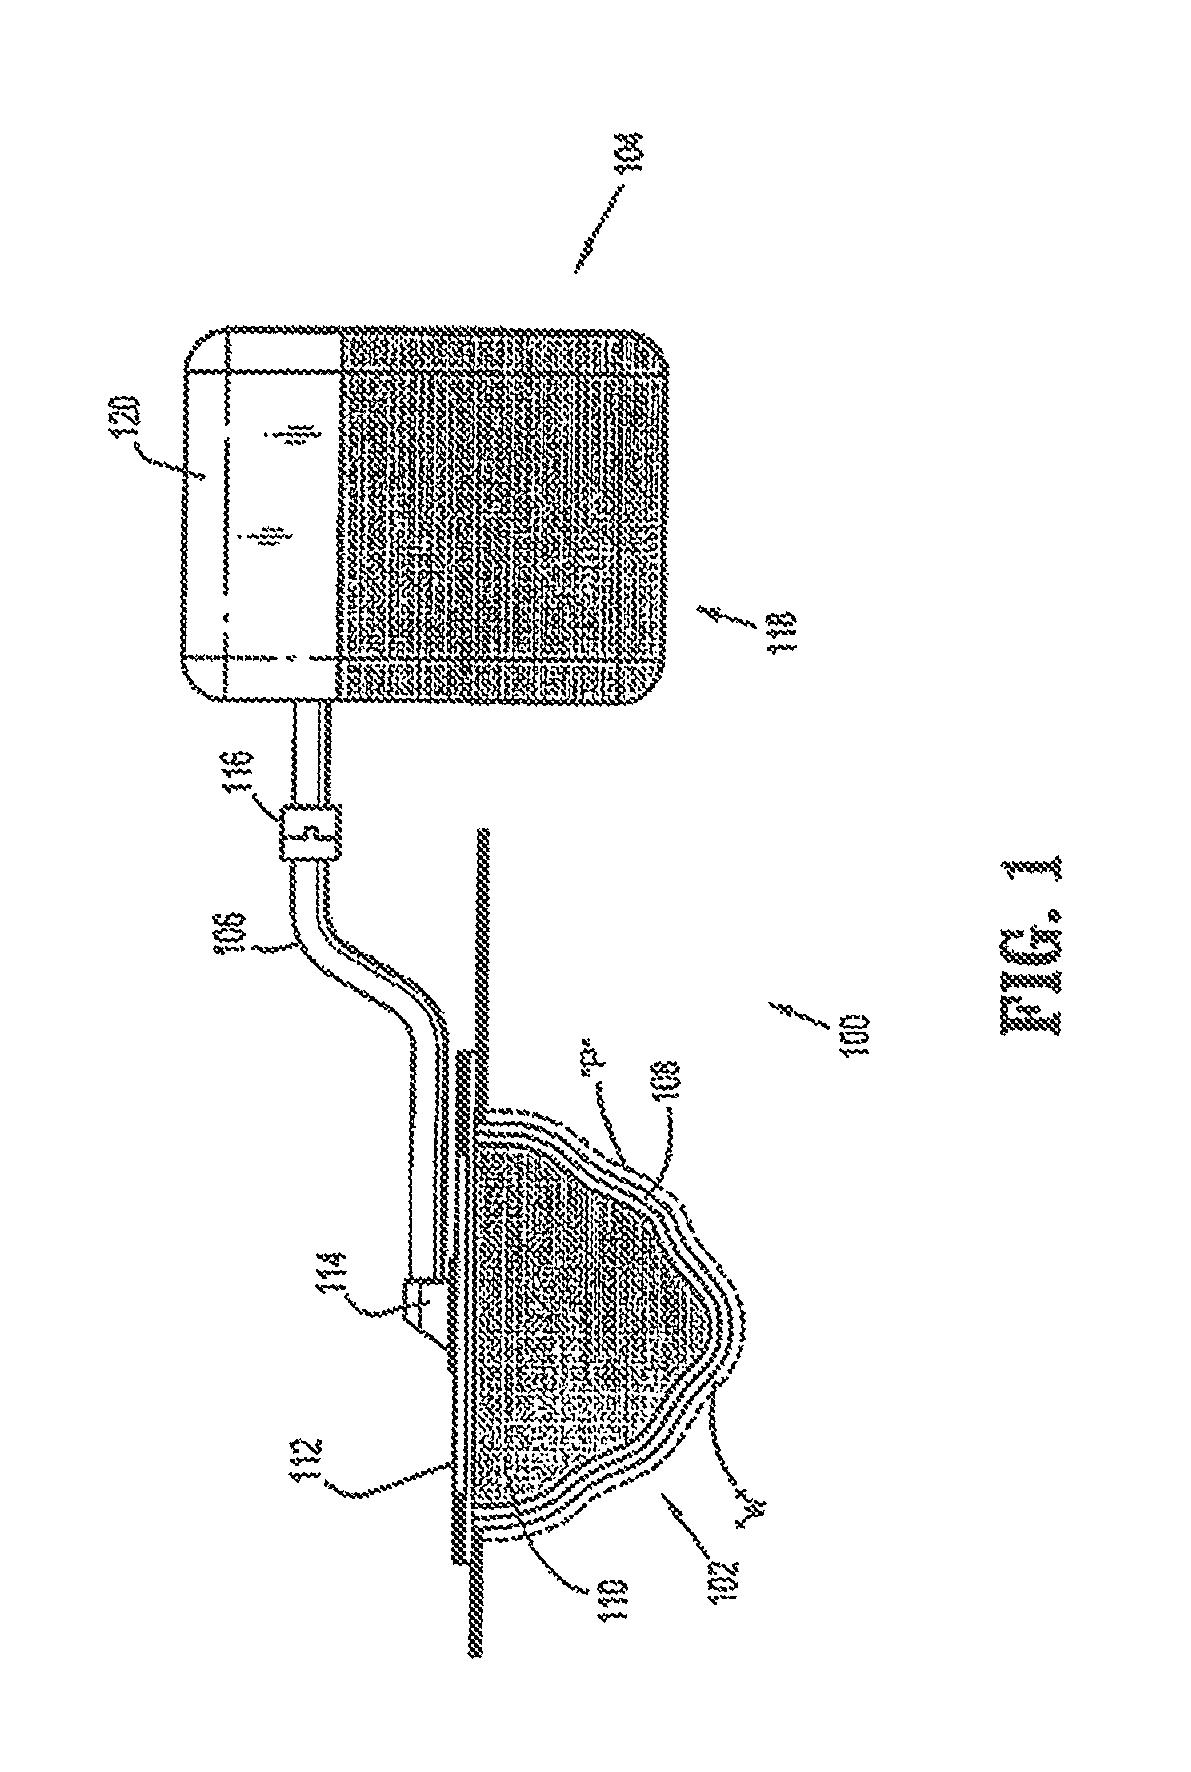 Wound therapy system with proportional valve mechanism